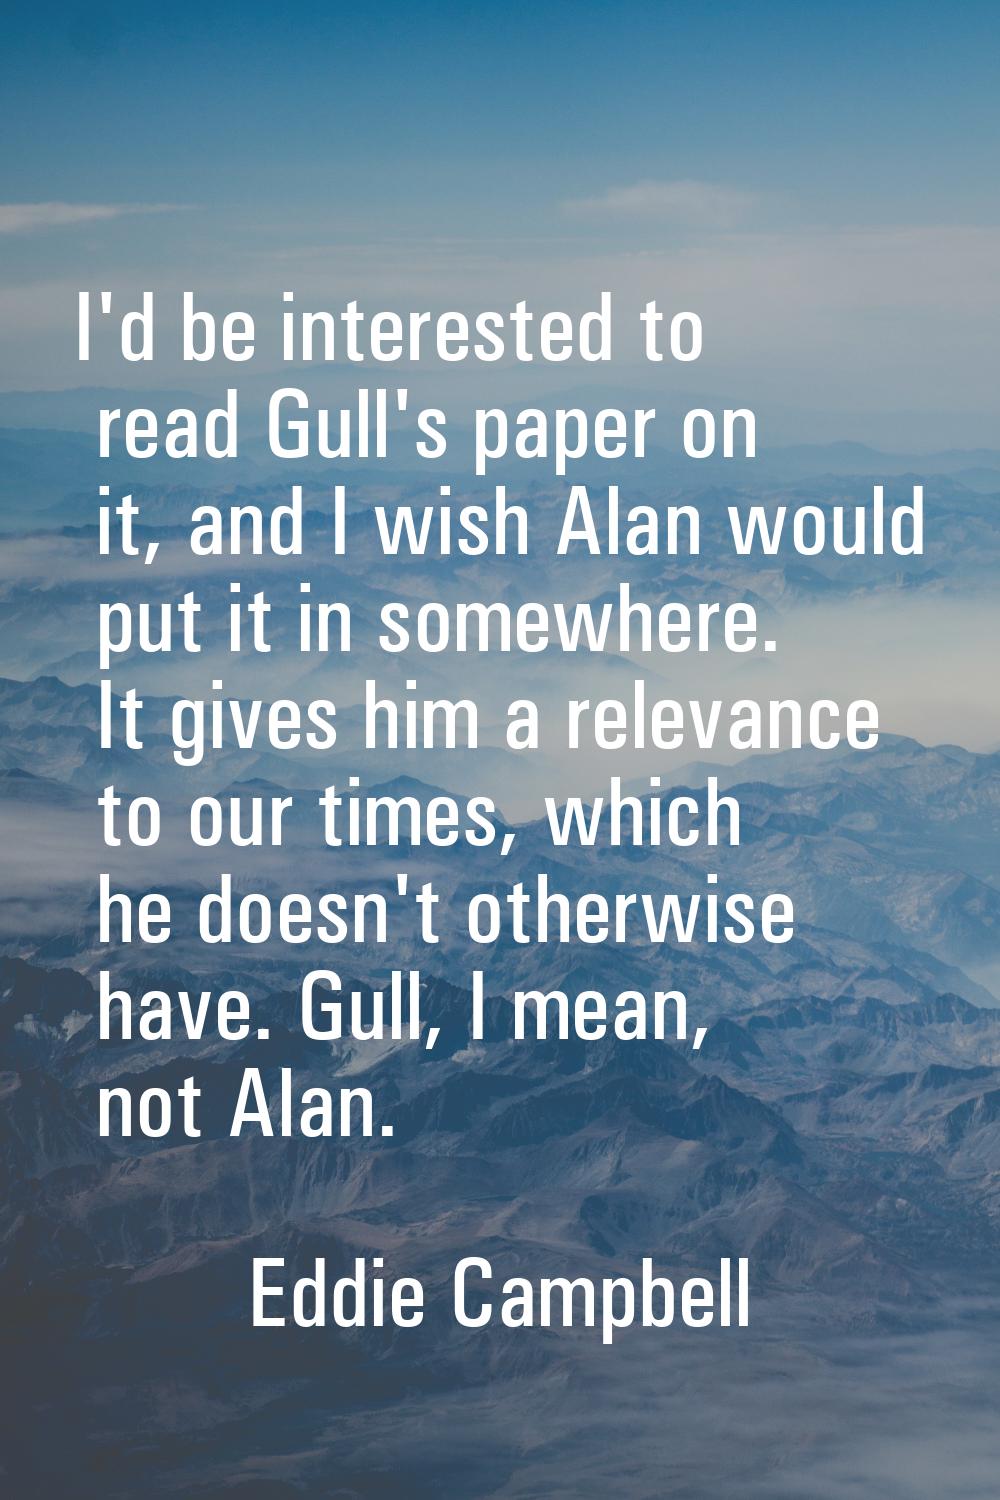 I'd be interested to read Gull's paper on it, and I wish Alan would put it in somewhere. It gives h